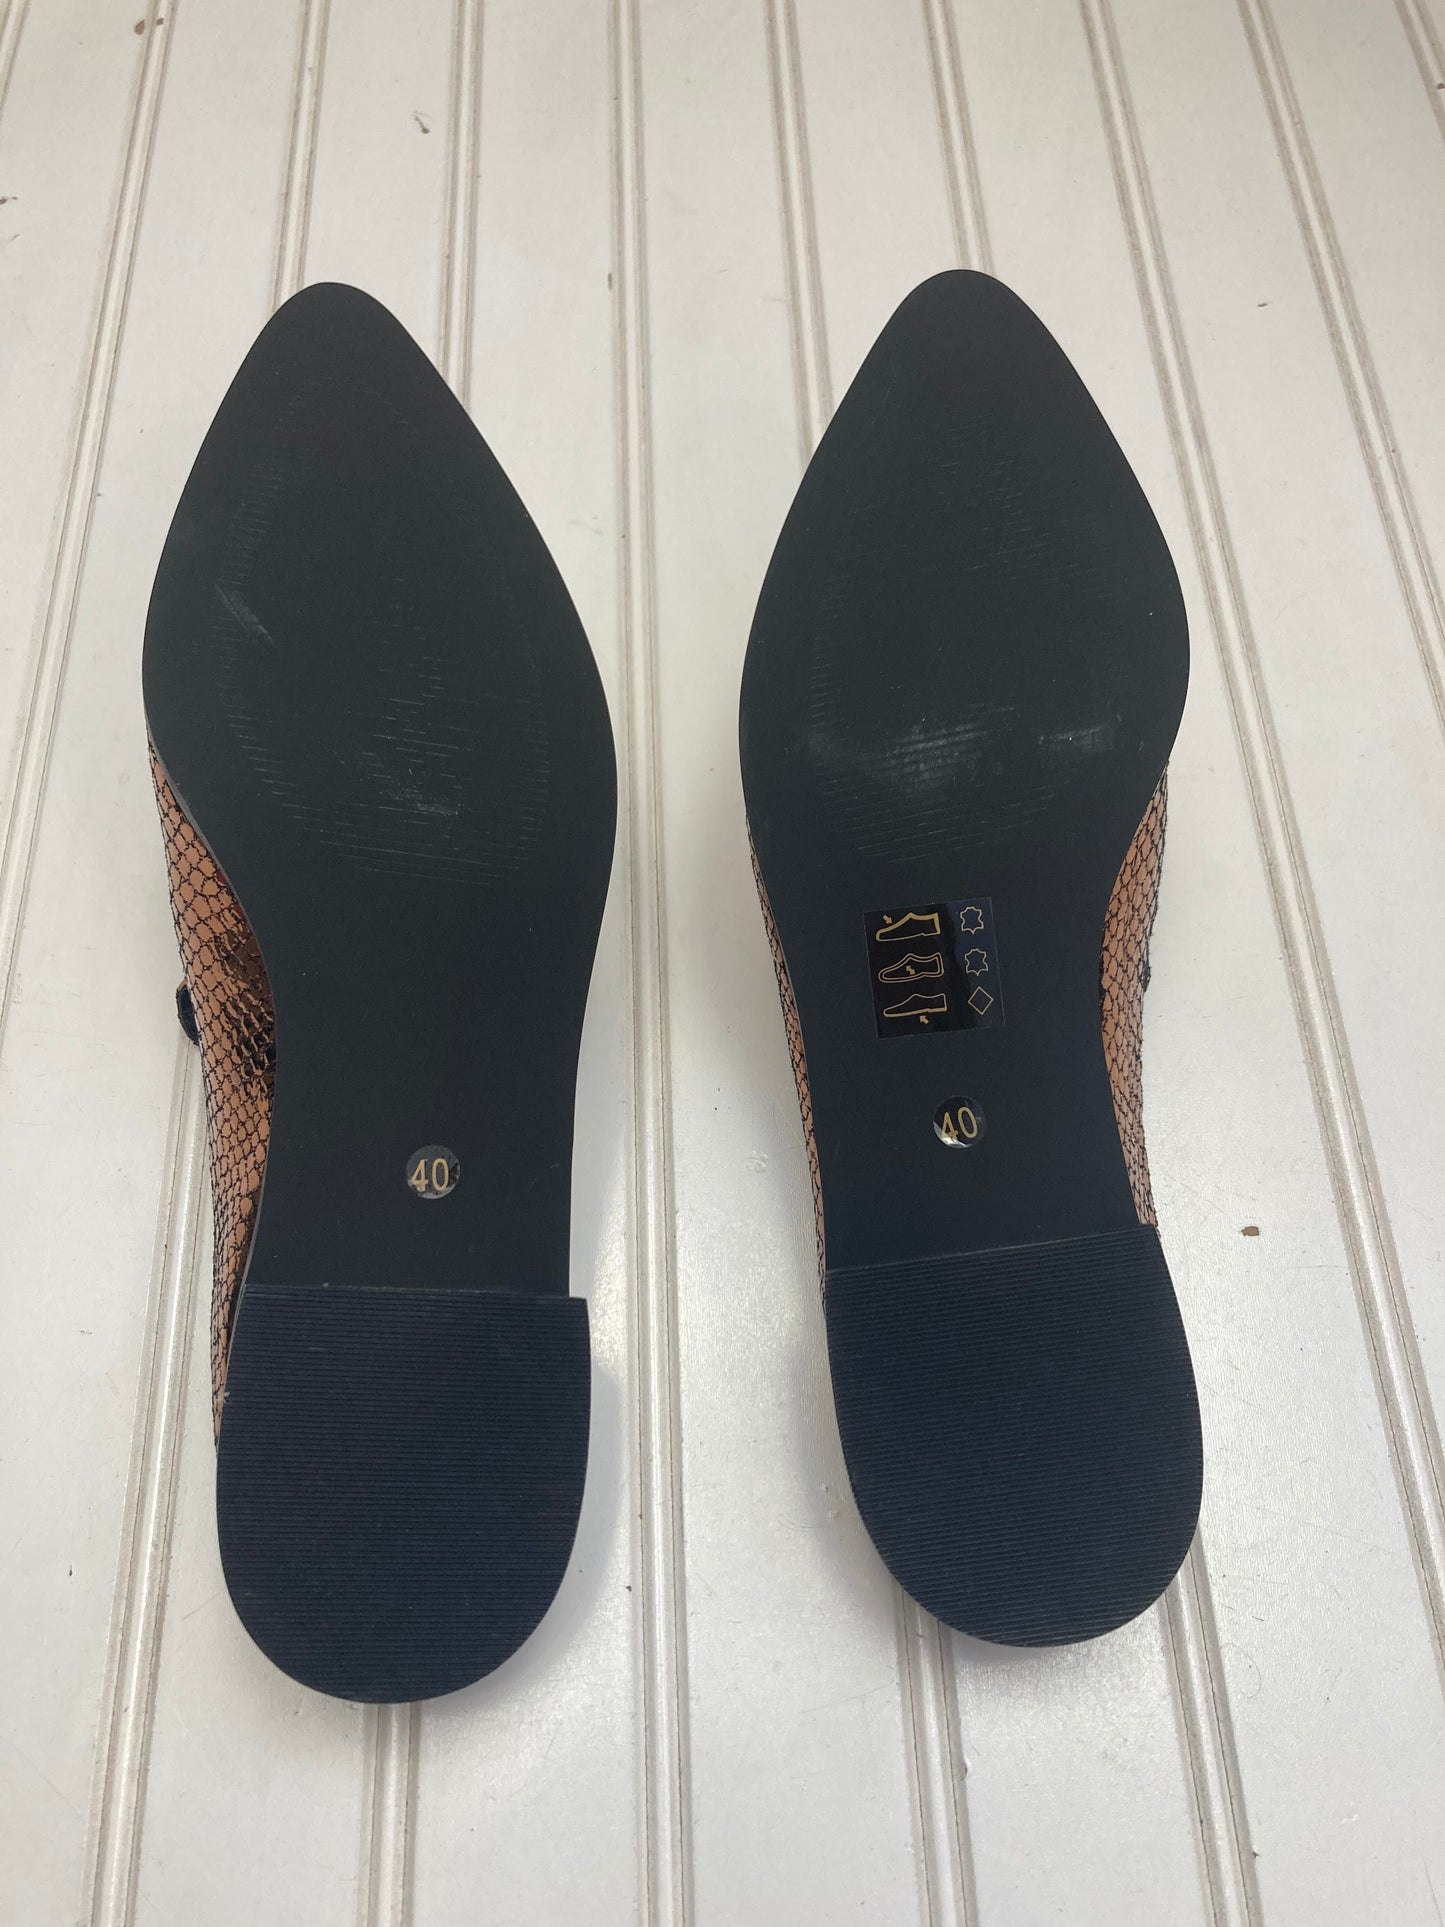 Shoes Flats By Shellys London  Size: 9